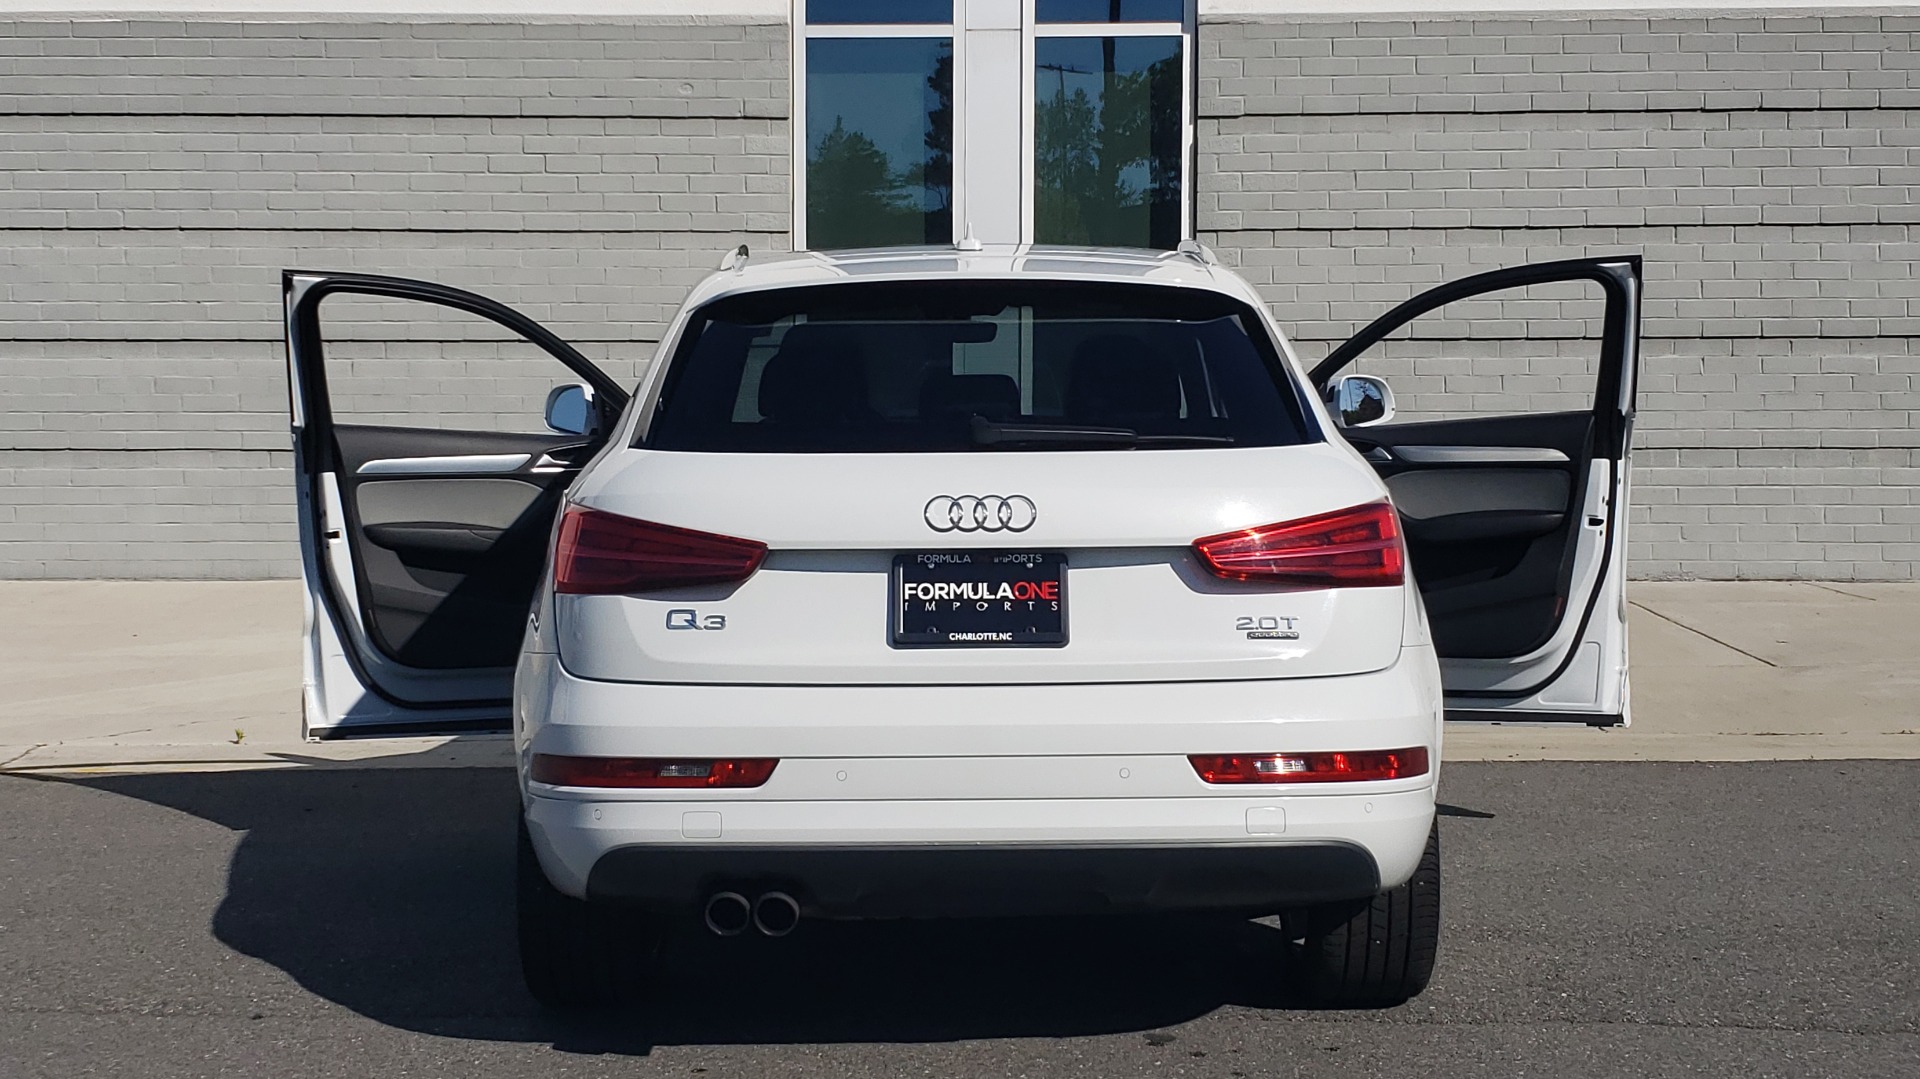 Used 2018 Audi Q3 PREMIUM PLUS 2.0T / SPORT PKG / NAV / BOSE / SUNROOF / REARVIEW for sale Sold at Formula Imports in Charlotte NC 28227 25